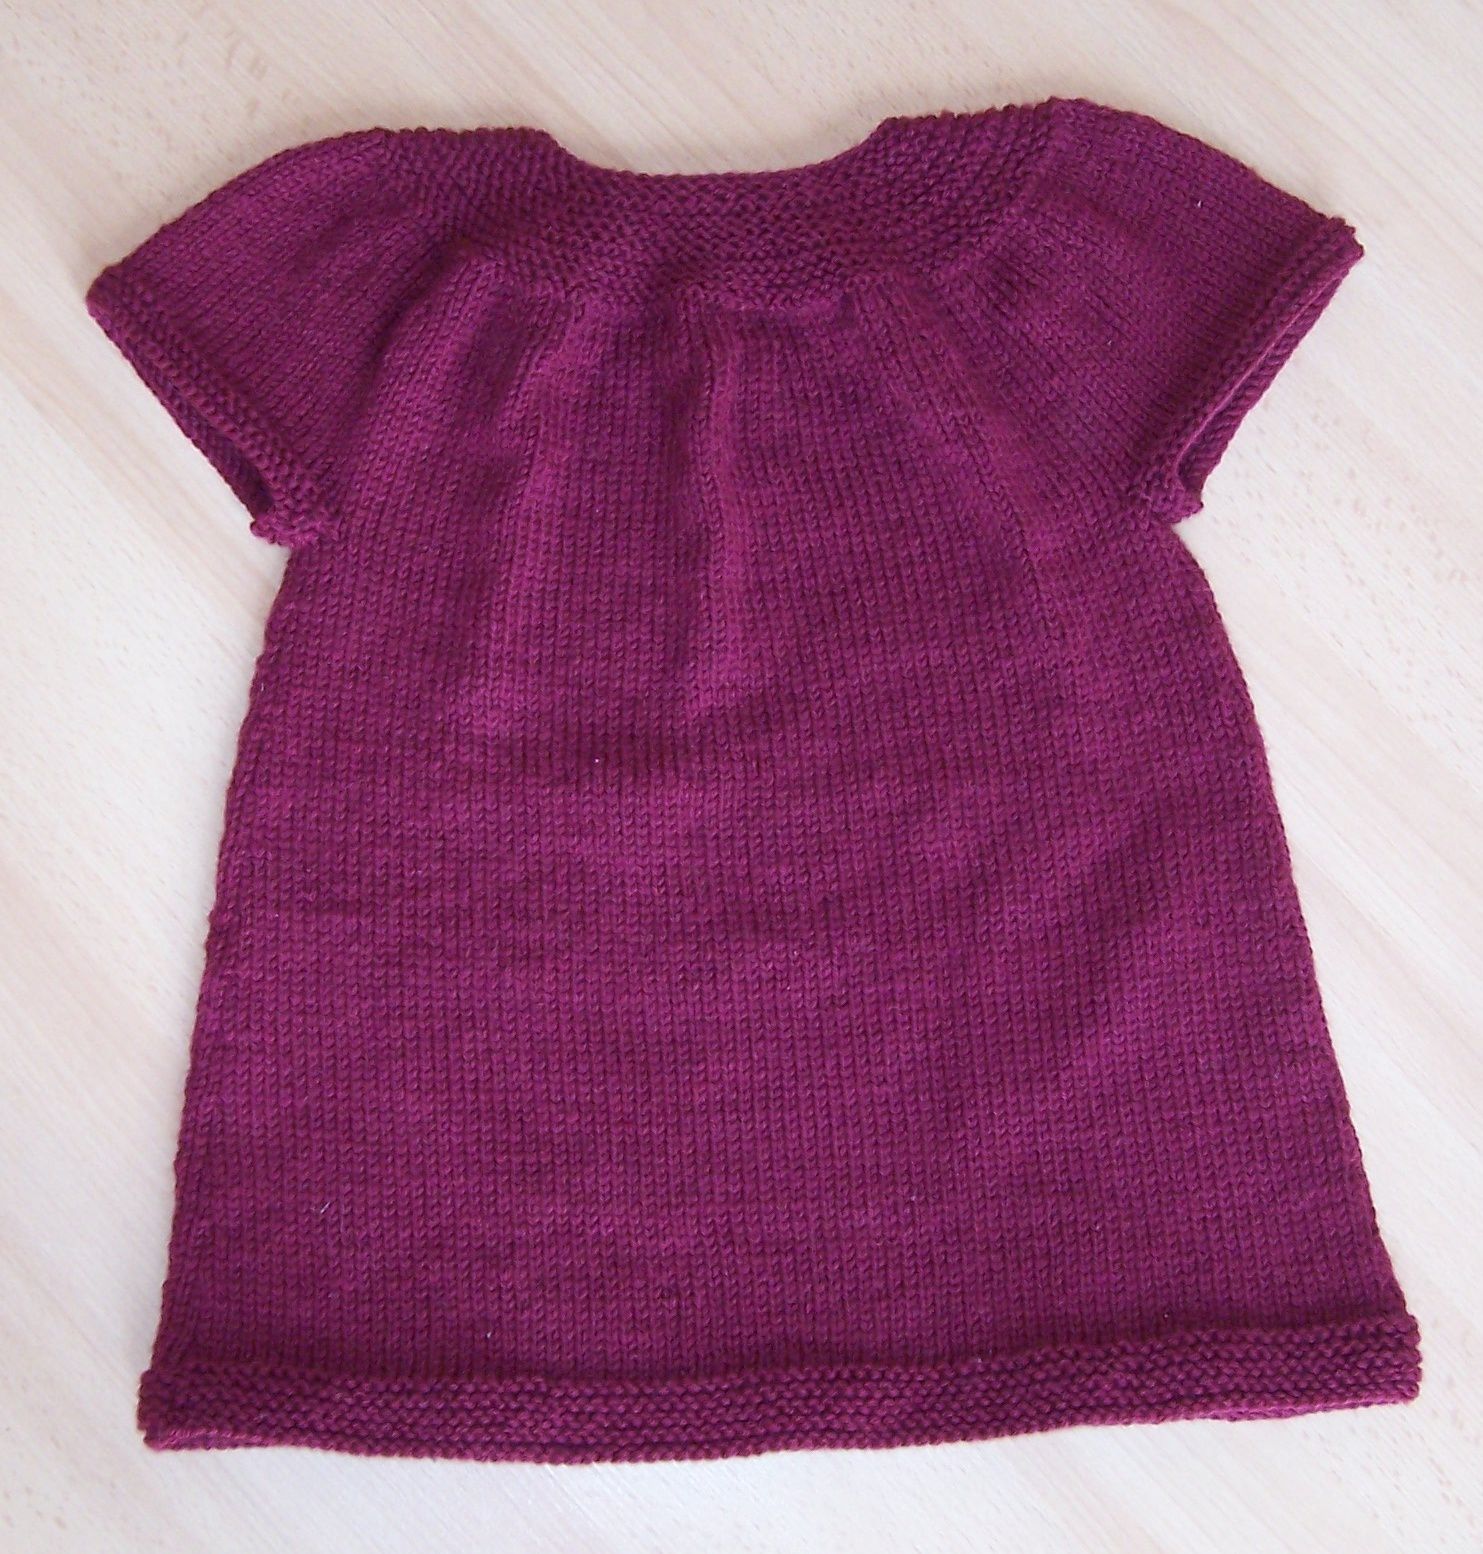 tricoter une robe 4 ans